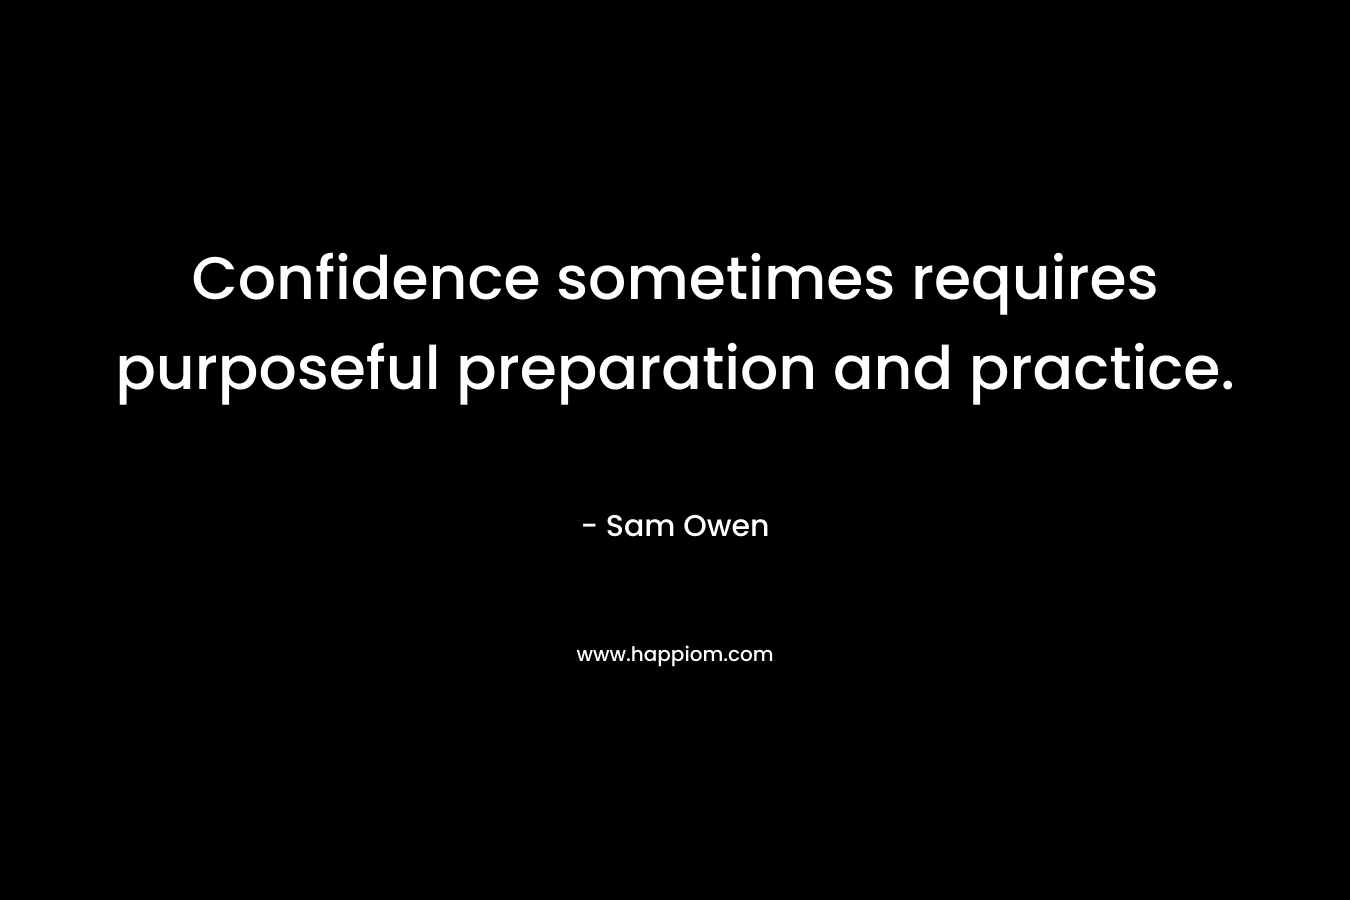 Confidence sometimes requires purposeful preparation and practice.